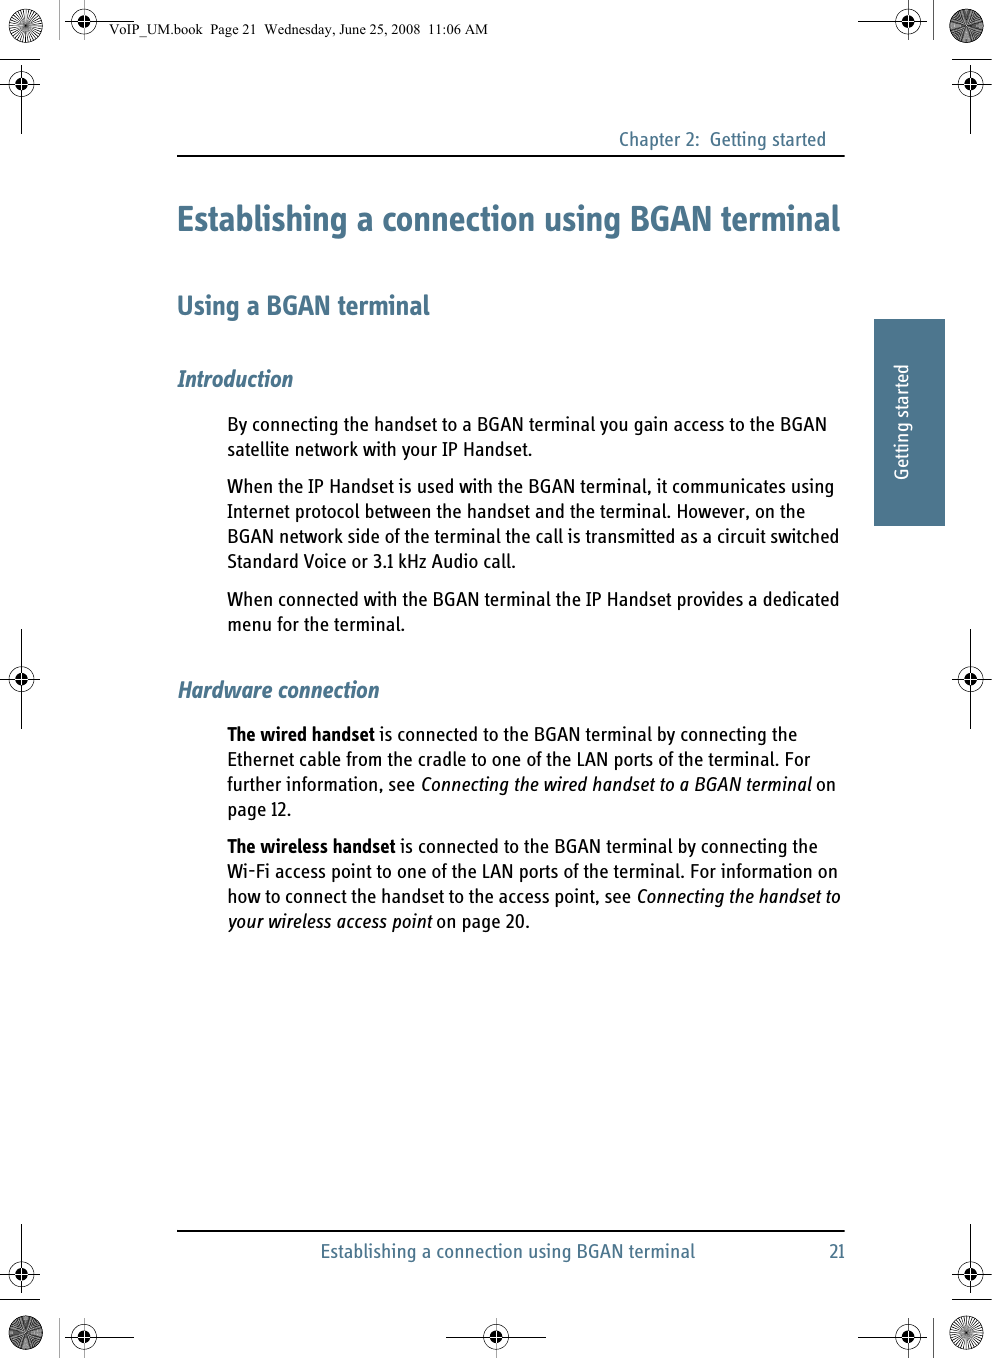 Chapter 2:  Getting startedEstablishing a connection using BGAN terminal 2122222Getting startedEstablishing a connection using BGAN terminalUsing a BGAN terminalIntroductionBy connecting the handset to a BGAN terminal you gain access to the BGAN satellite network with your IP Handset.When the IP Handset is used with the BGAN terminal, it communicates using Internet protocol between the handset and the terminal. However, on the BGAN network side of the terminal the call is transmitted as a circuit switched Standard Voice or 3.1 kHz Audio call.When connected with the BGAN terminal the IP Handset provides a dedicated menu for the terminal.Hardware connectionThe wired handset is connected to the BGAN terminal by connecting the Ethernet cable from the cradle to one of the LAN ports of the terminal. For further information, see Connecting the wired handset to a BGAN terminal on page 12.The wireless handset is connected to the BGAN terminal by connecting the Wi-Fi access point to one of the LAN ports of the terminal. For information on how to connect the handset to the access point, see Connecting the handset to your wireless access point on page 20.VoIP_UM.book  Page 21  Wednesday, June 25, 2008  11:06 AM